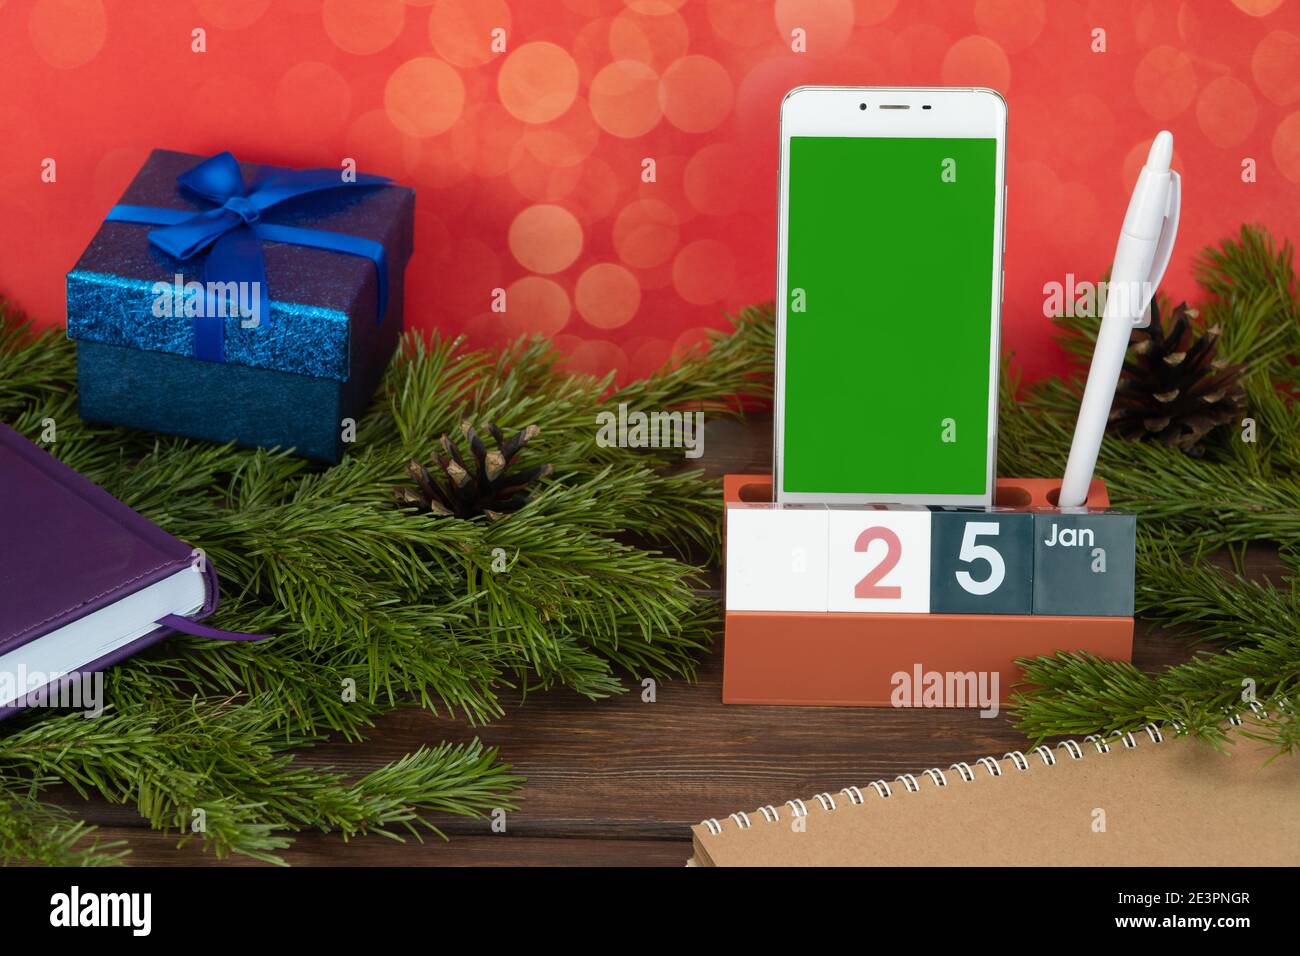 desktop calendar with the date January 25 and a cell phone. Plans for the day.  Stock Photo